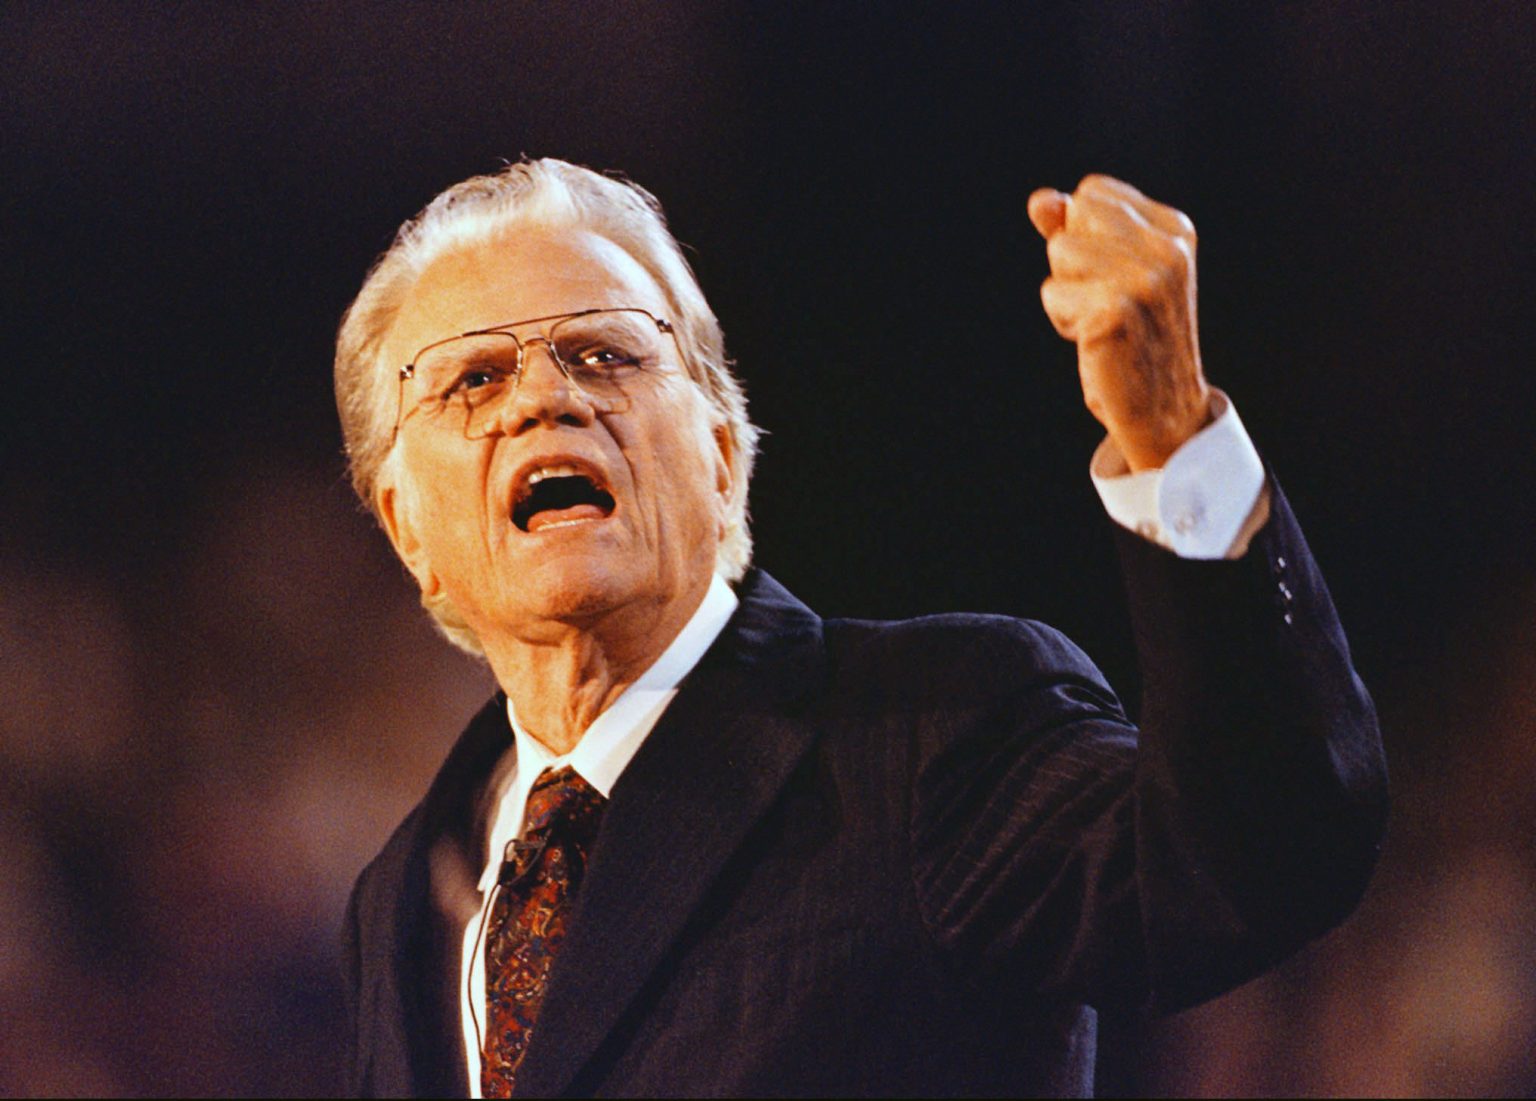 DOWNLOAD MP3: The Brevity of Time by Evangelist BILLY GRAHAM (Sermon) 17